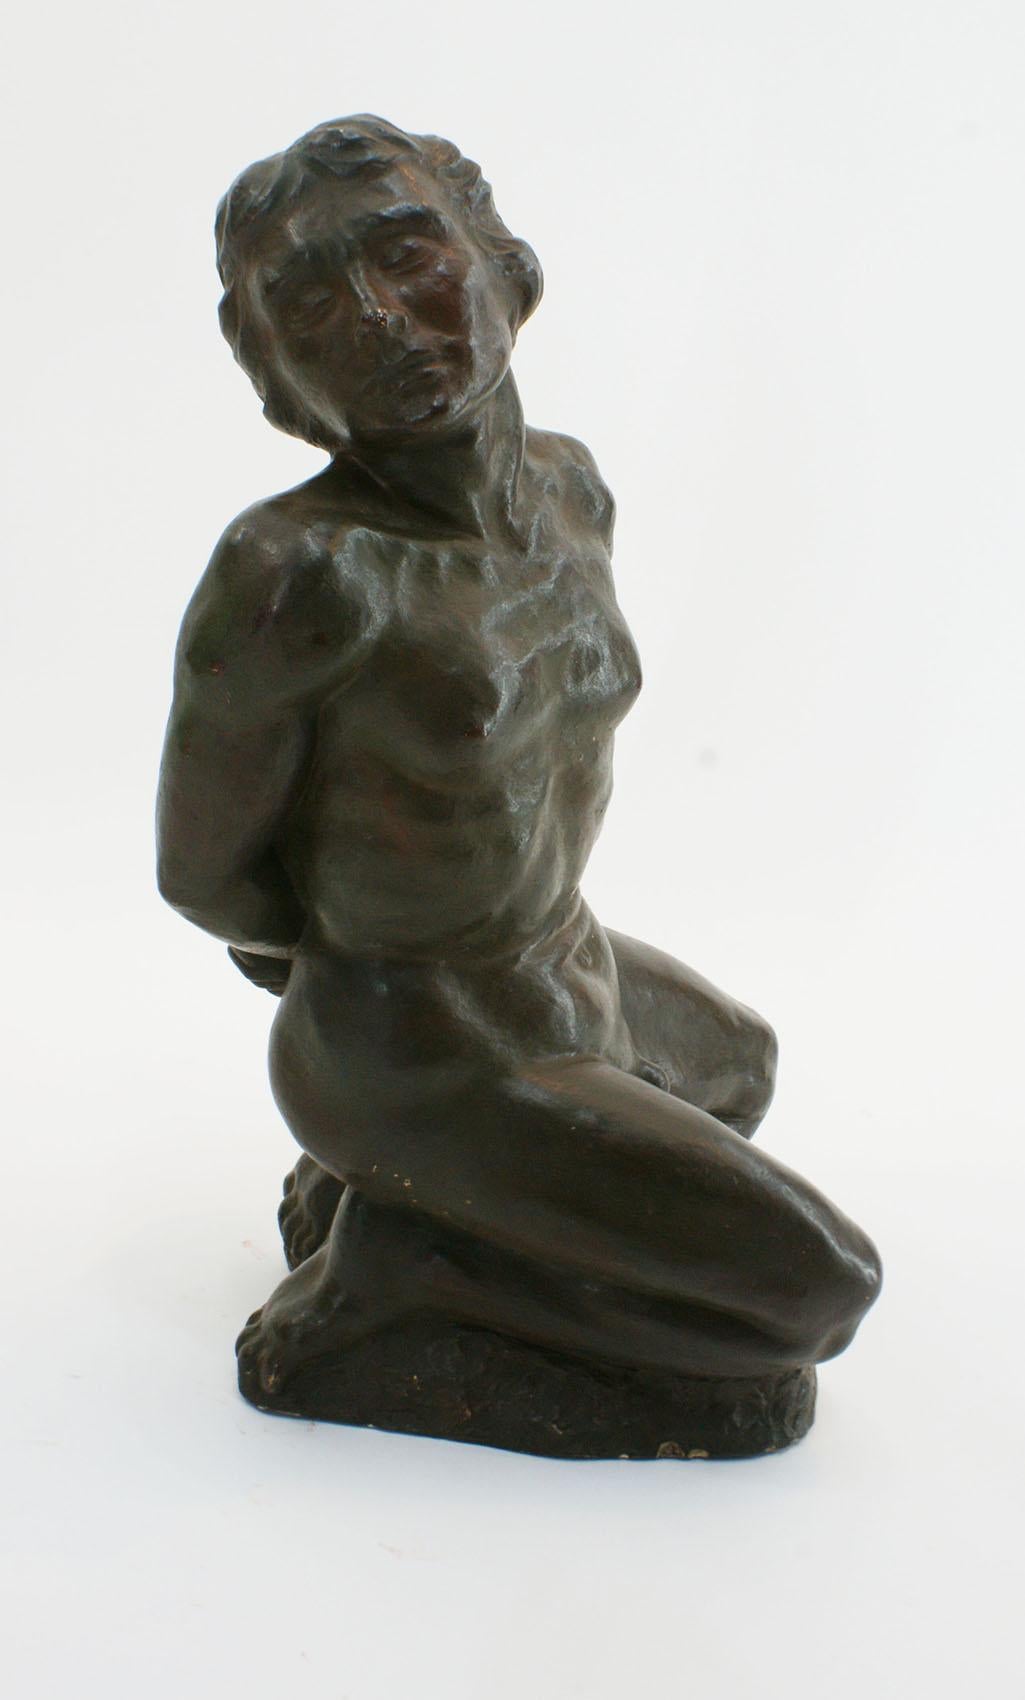 French Art Deco terracotta sculpture in black patina color by R.Brageu representing a naked athletic young man on his knees, in an attitude of submission. This work focuses on the human anatomy, using an Expressionist approach. The sculpture is